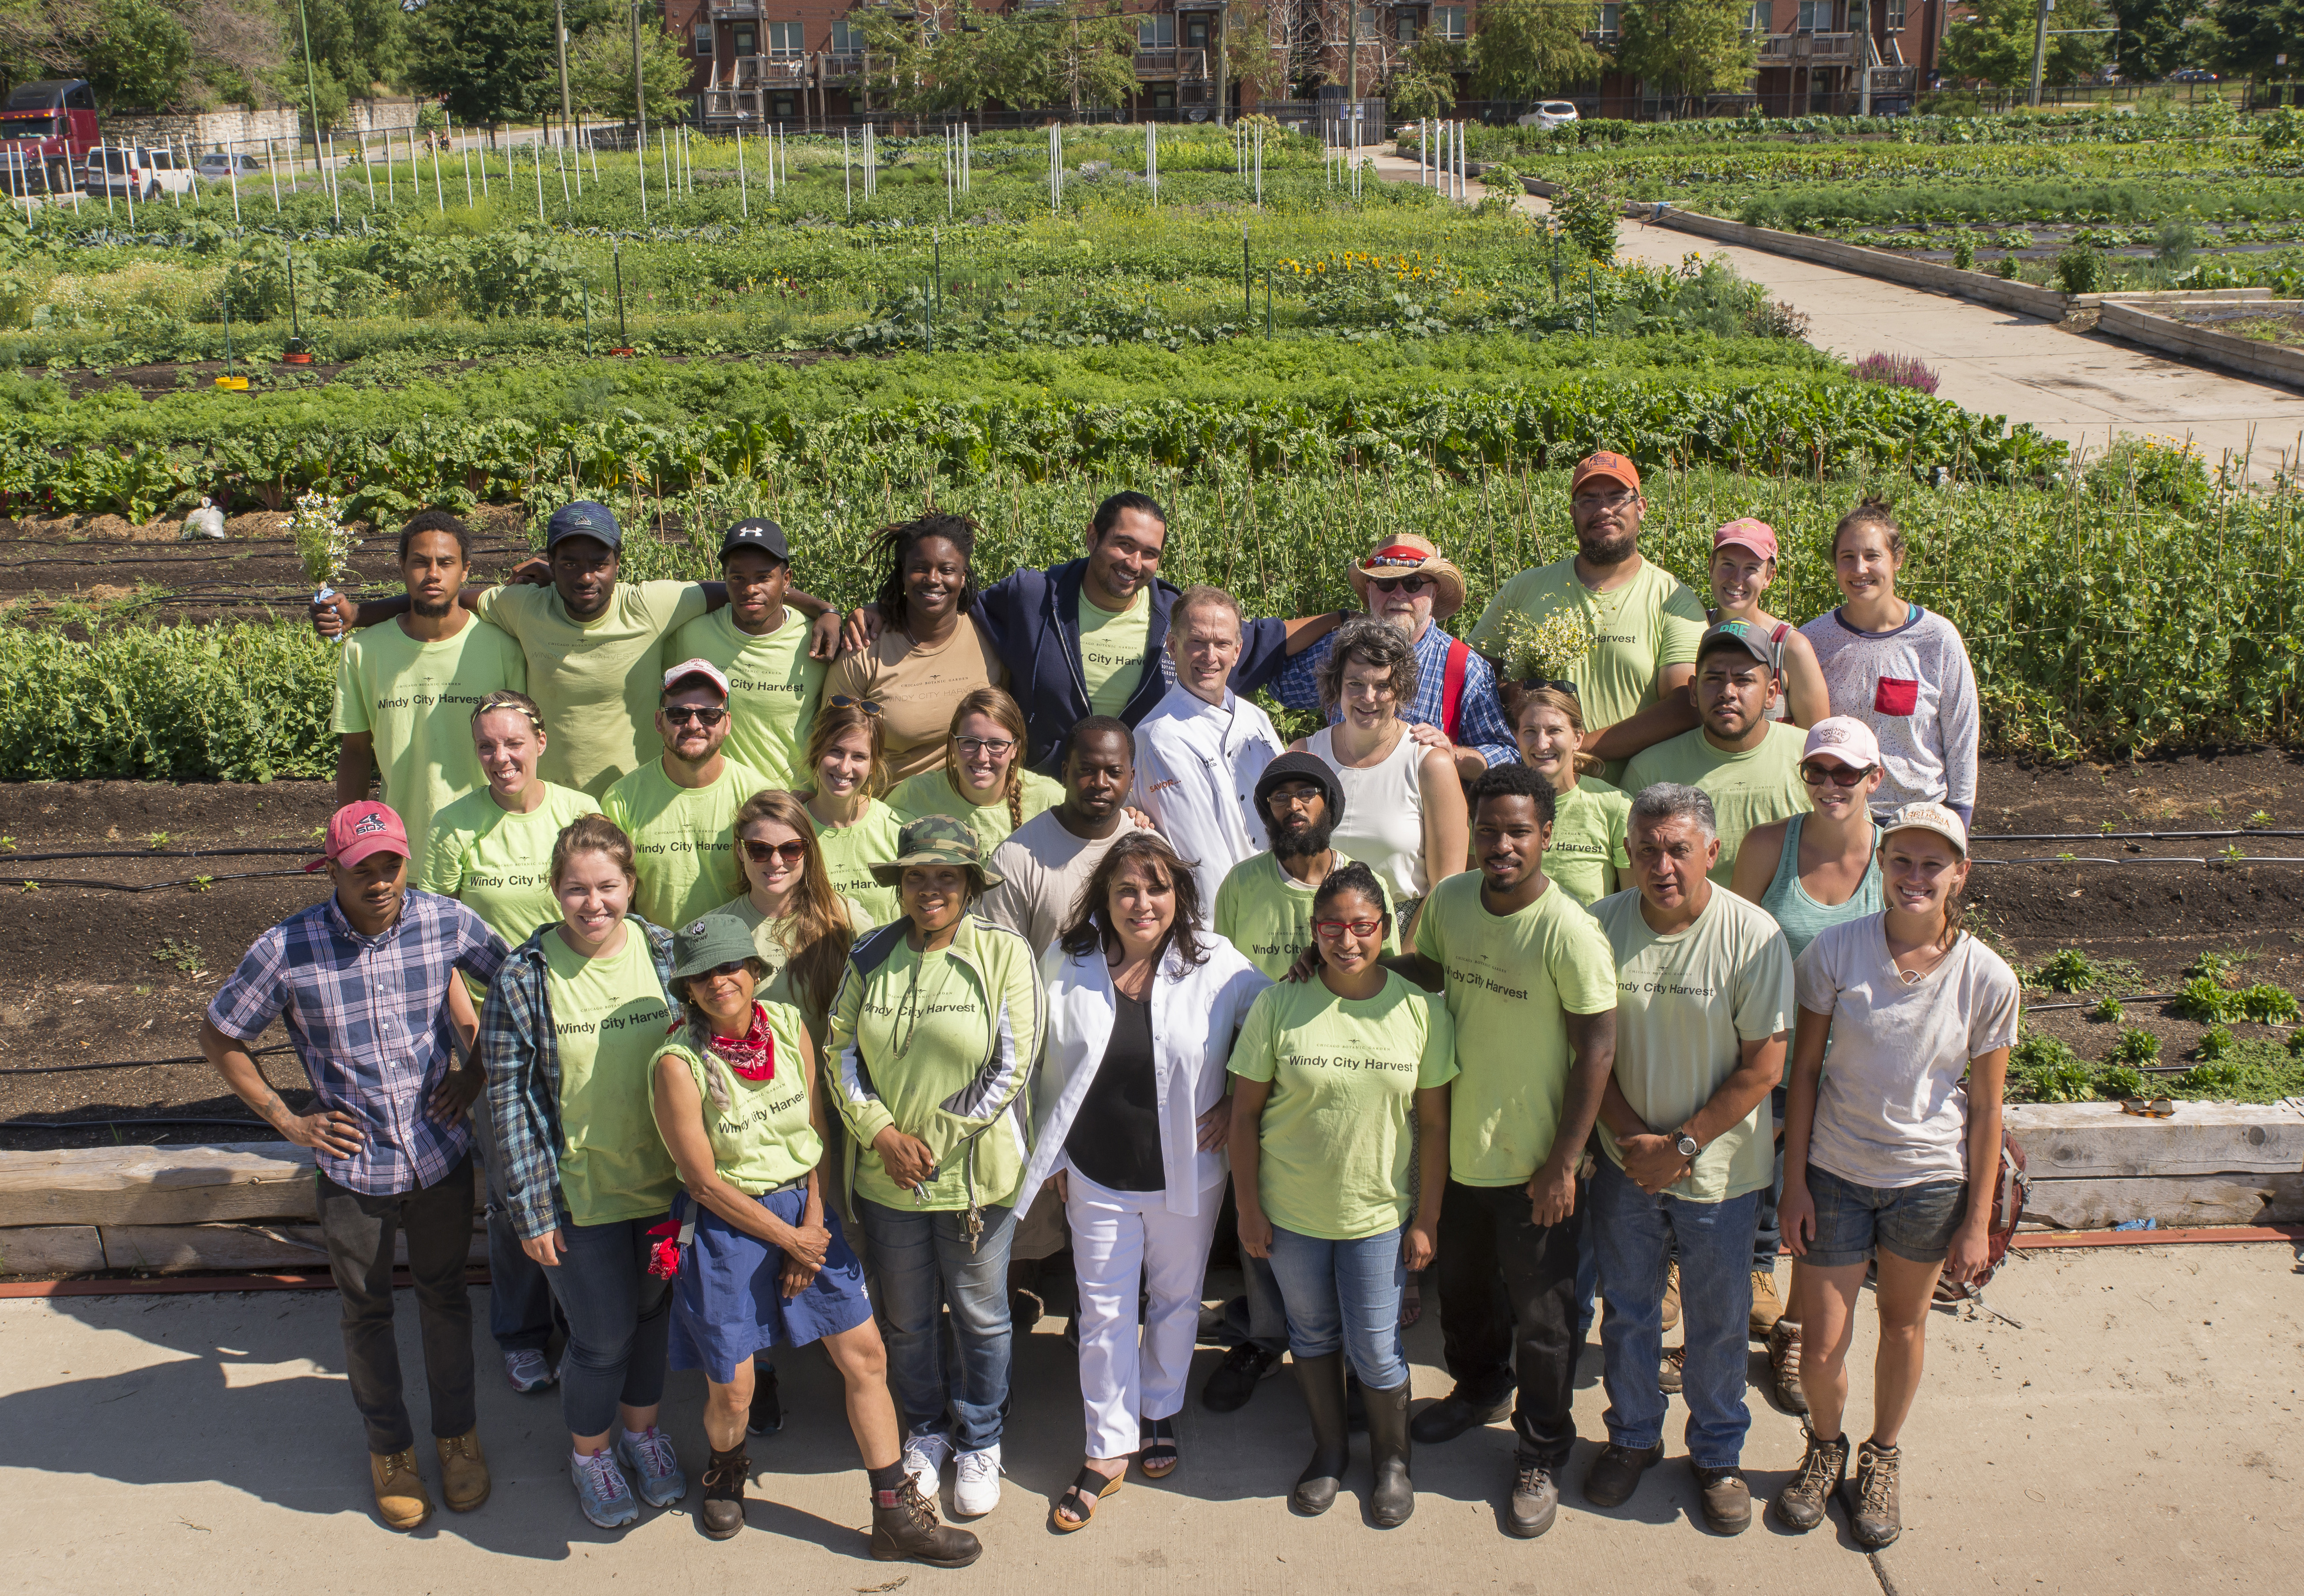 Windy City Harvest (and partners) is finalist in Food to Market Challenge